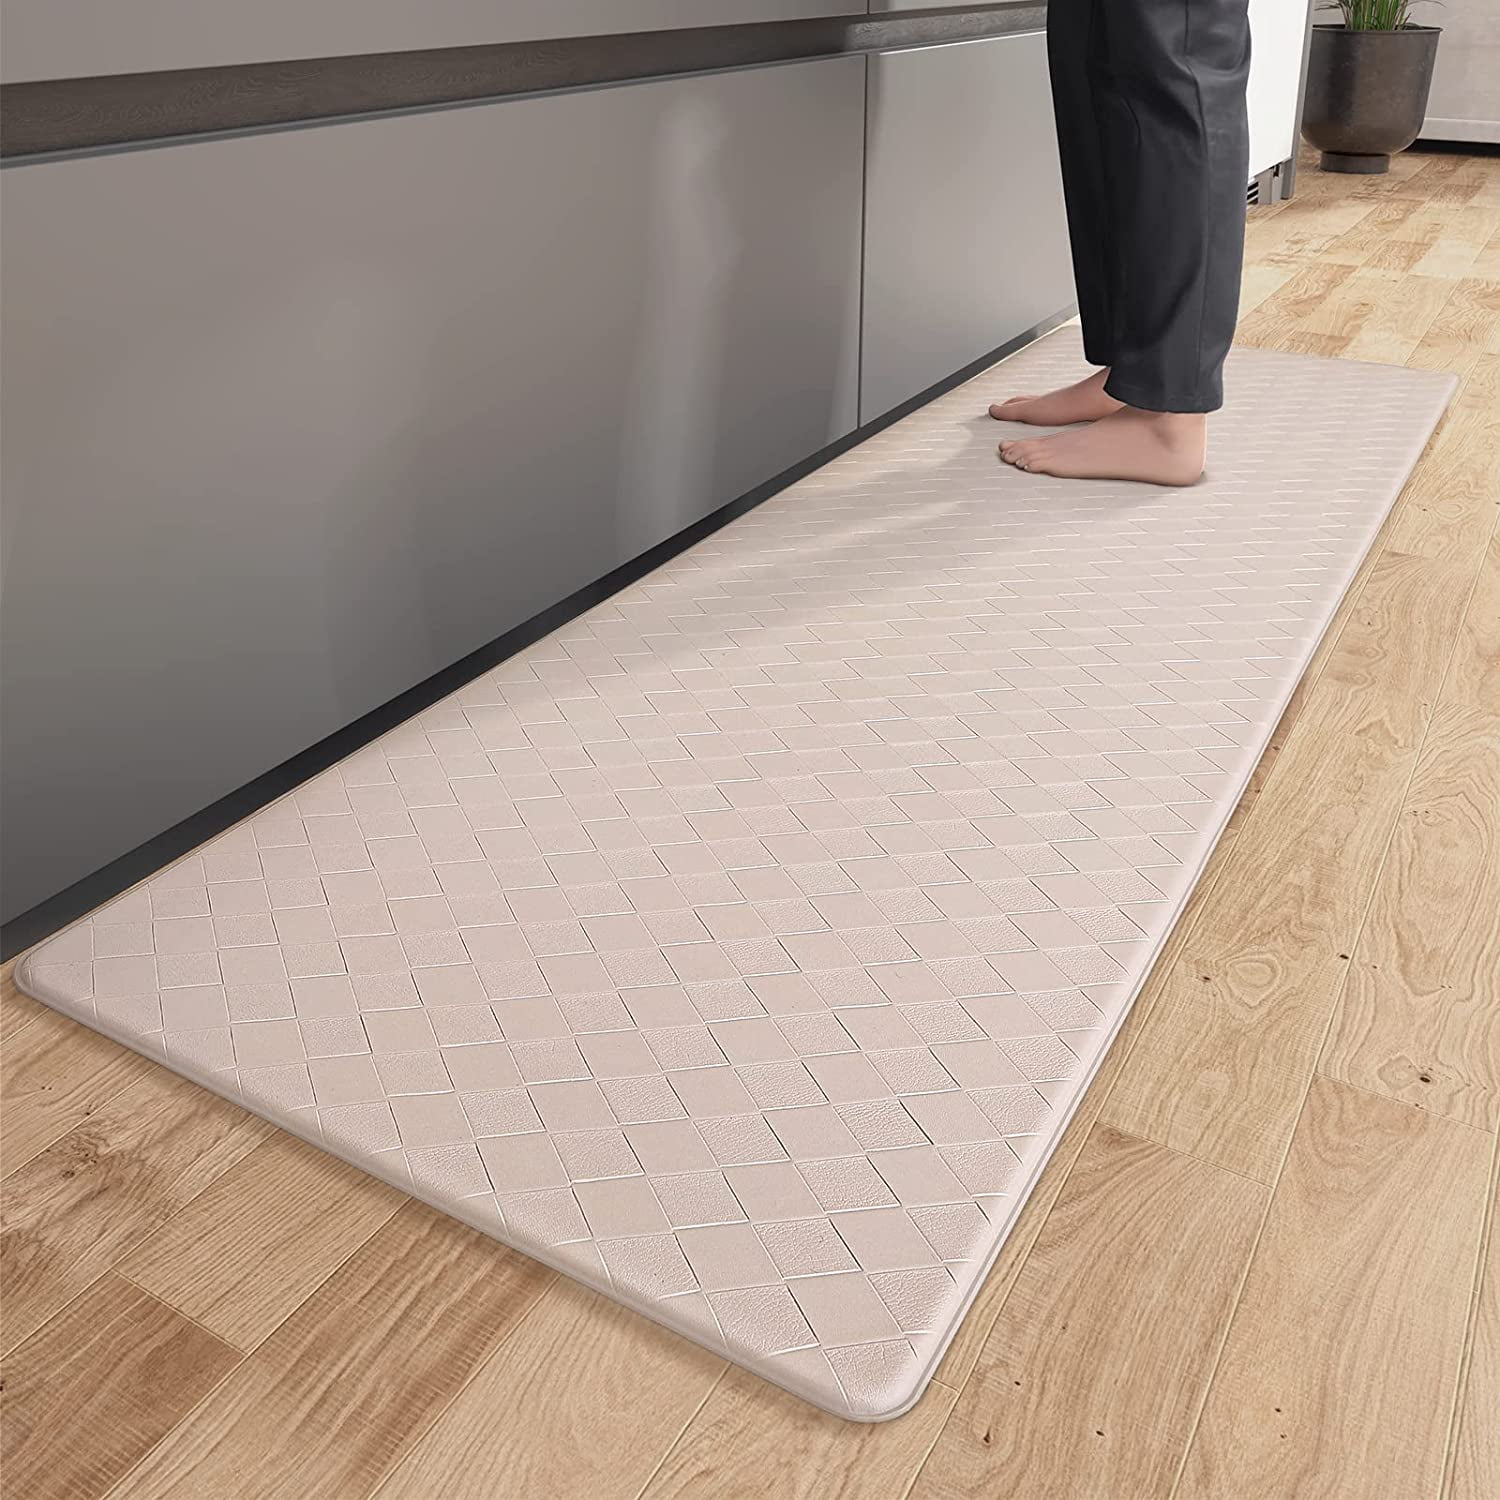 WISELIFE Kitchen Mat, Cushioned Anti-Fatigue 17.3x 59 Waterproof Non-Slip  Heavy Duty Ergonomic Comfort Rugs for Floor Home, Office, Sink, Laundry